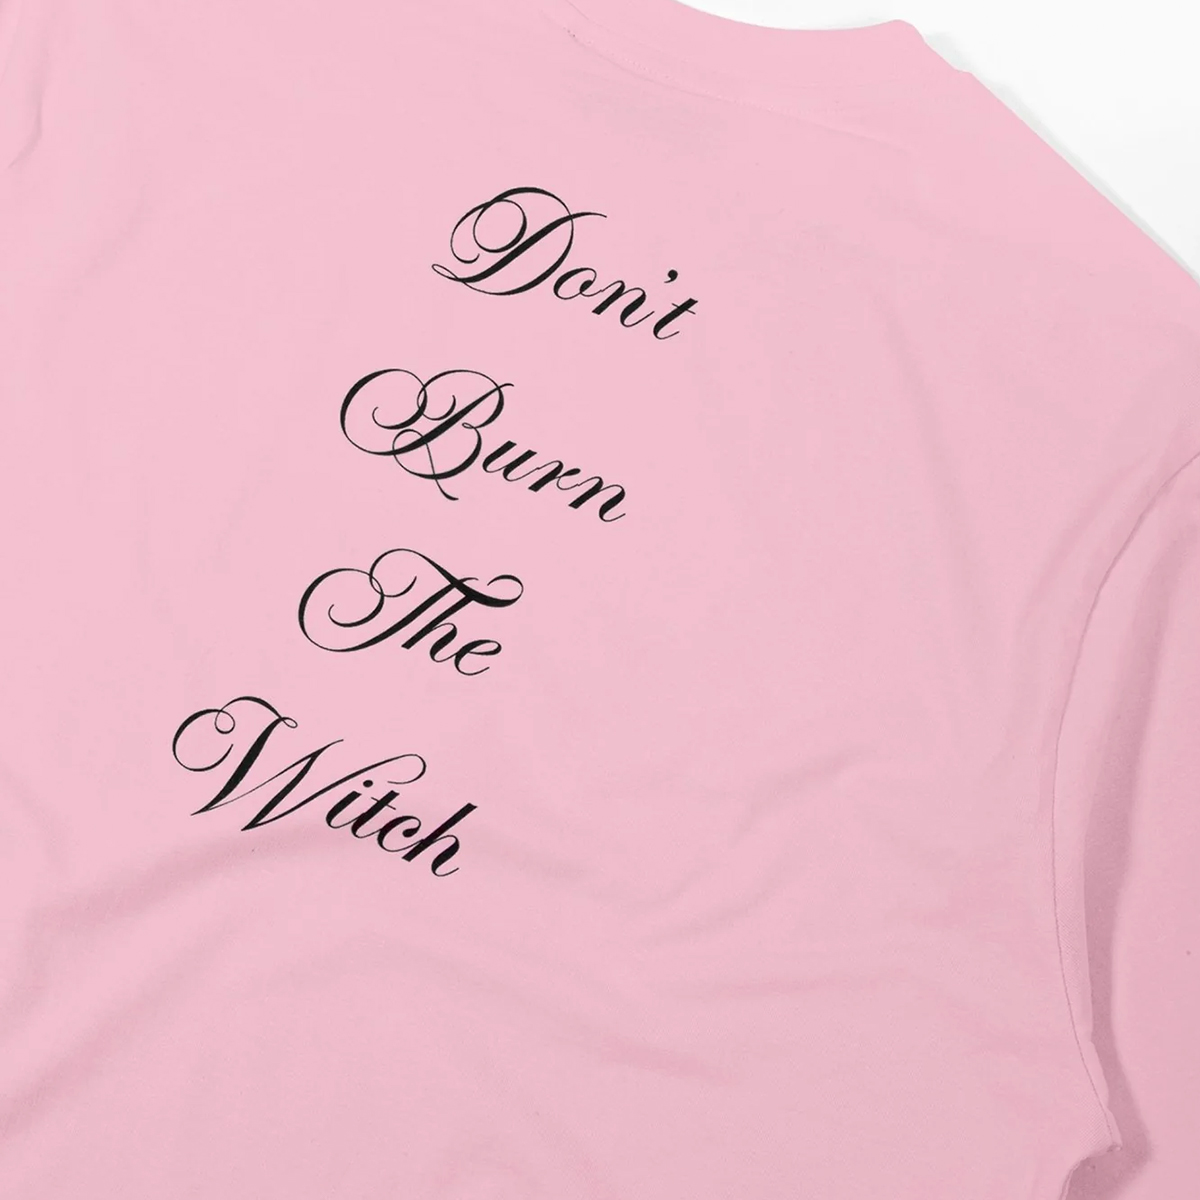 Dont Burn Tee - Sour Pink